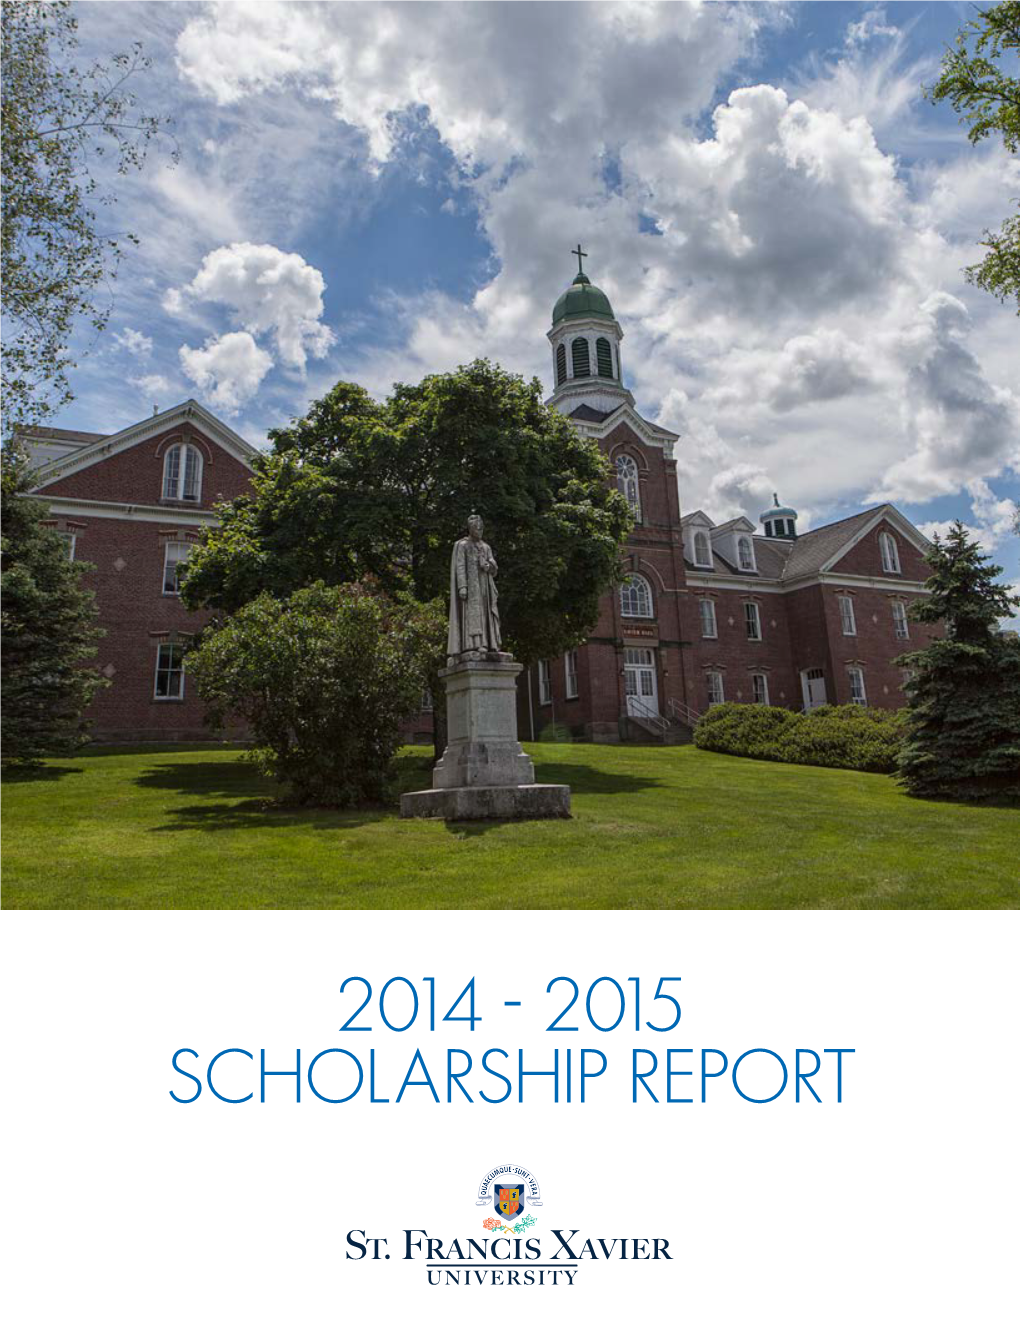 2014 - 2015 Scholarship Report About the University